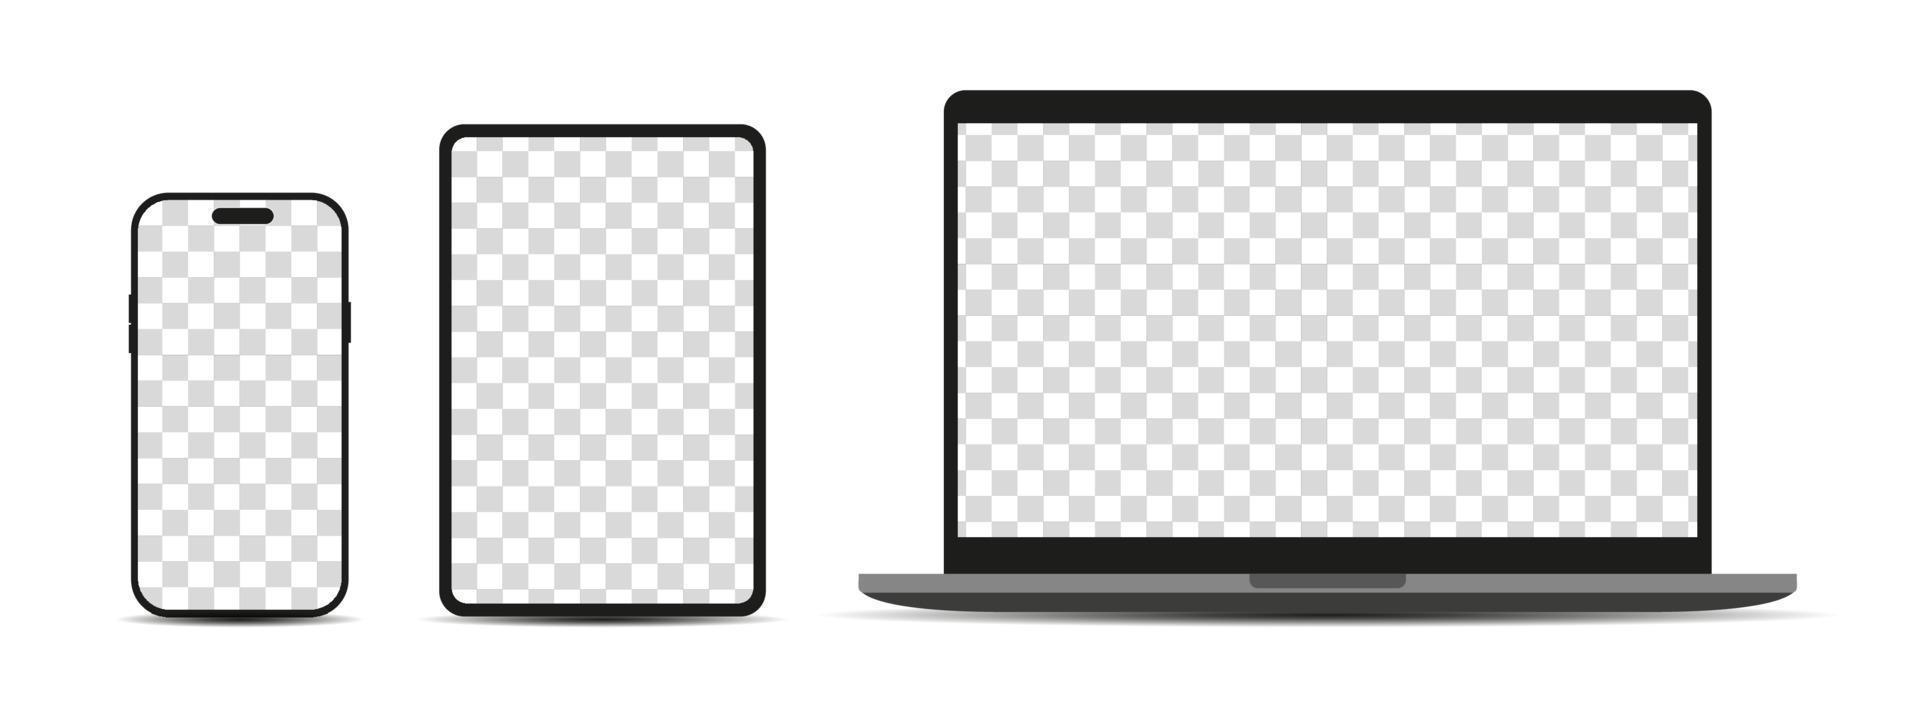 set of device screen mockup. smartphone, tablet, laptop with blank screen for your design vector